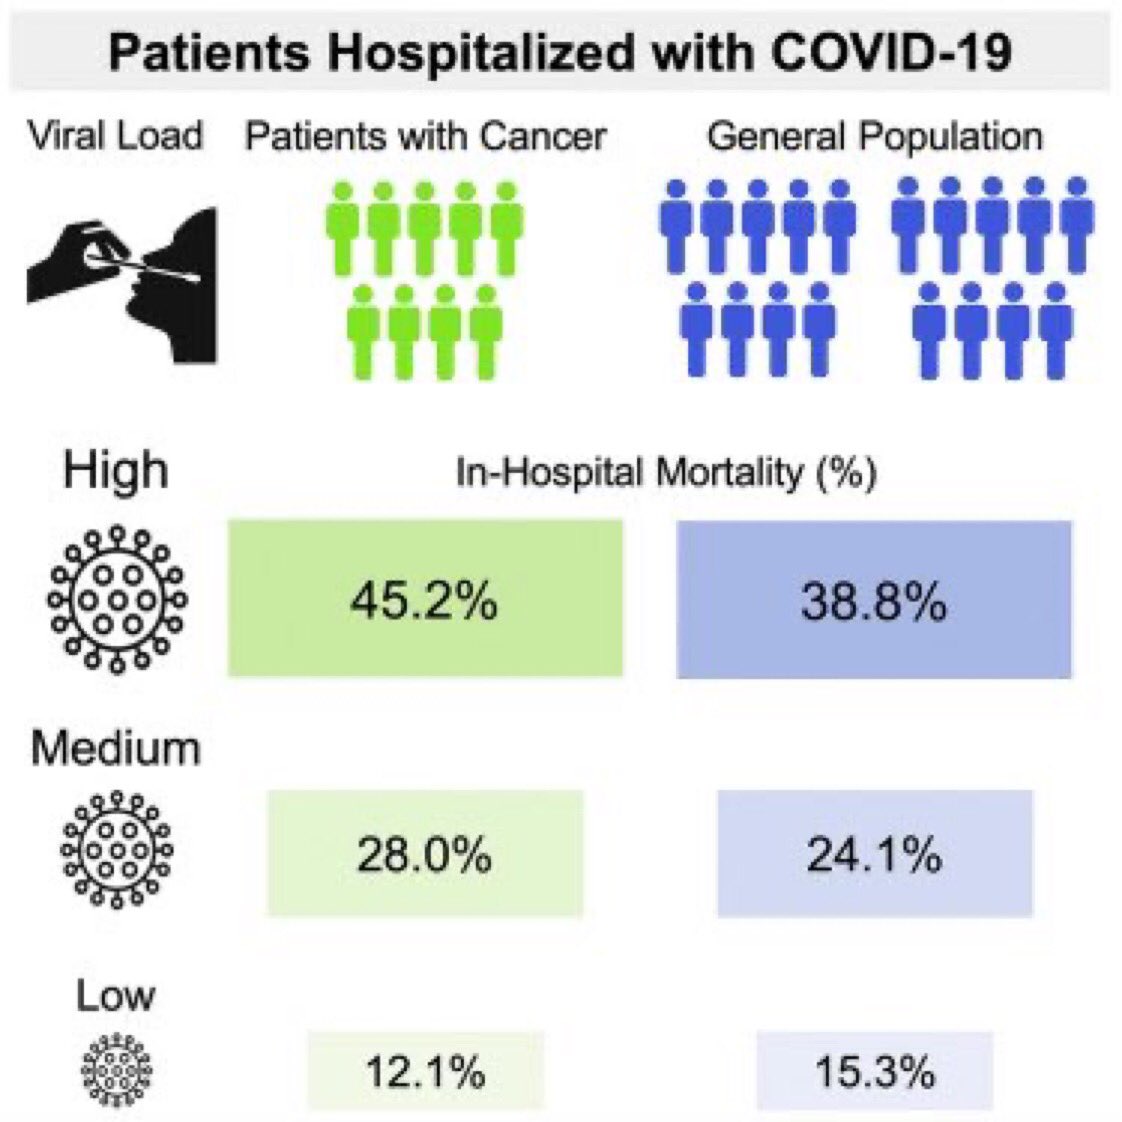 7) also, in this earlier study  lower VIRAL LOAD (higher Ct value at hospital admission =>  lower DEATH RISK. But viral load also means transmission potential.  https://www.sciencedirect.com/science/article/pii/S1535610820304815